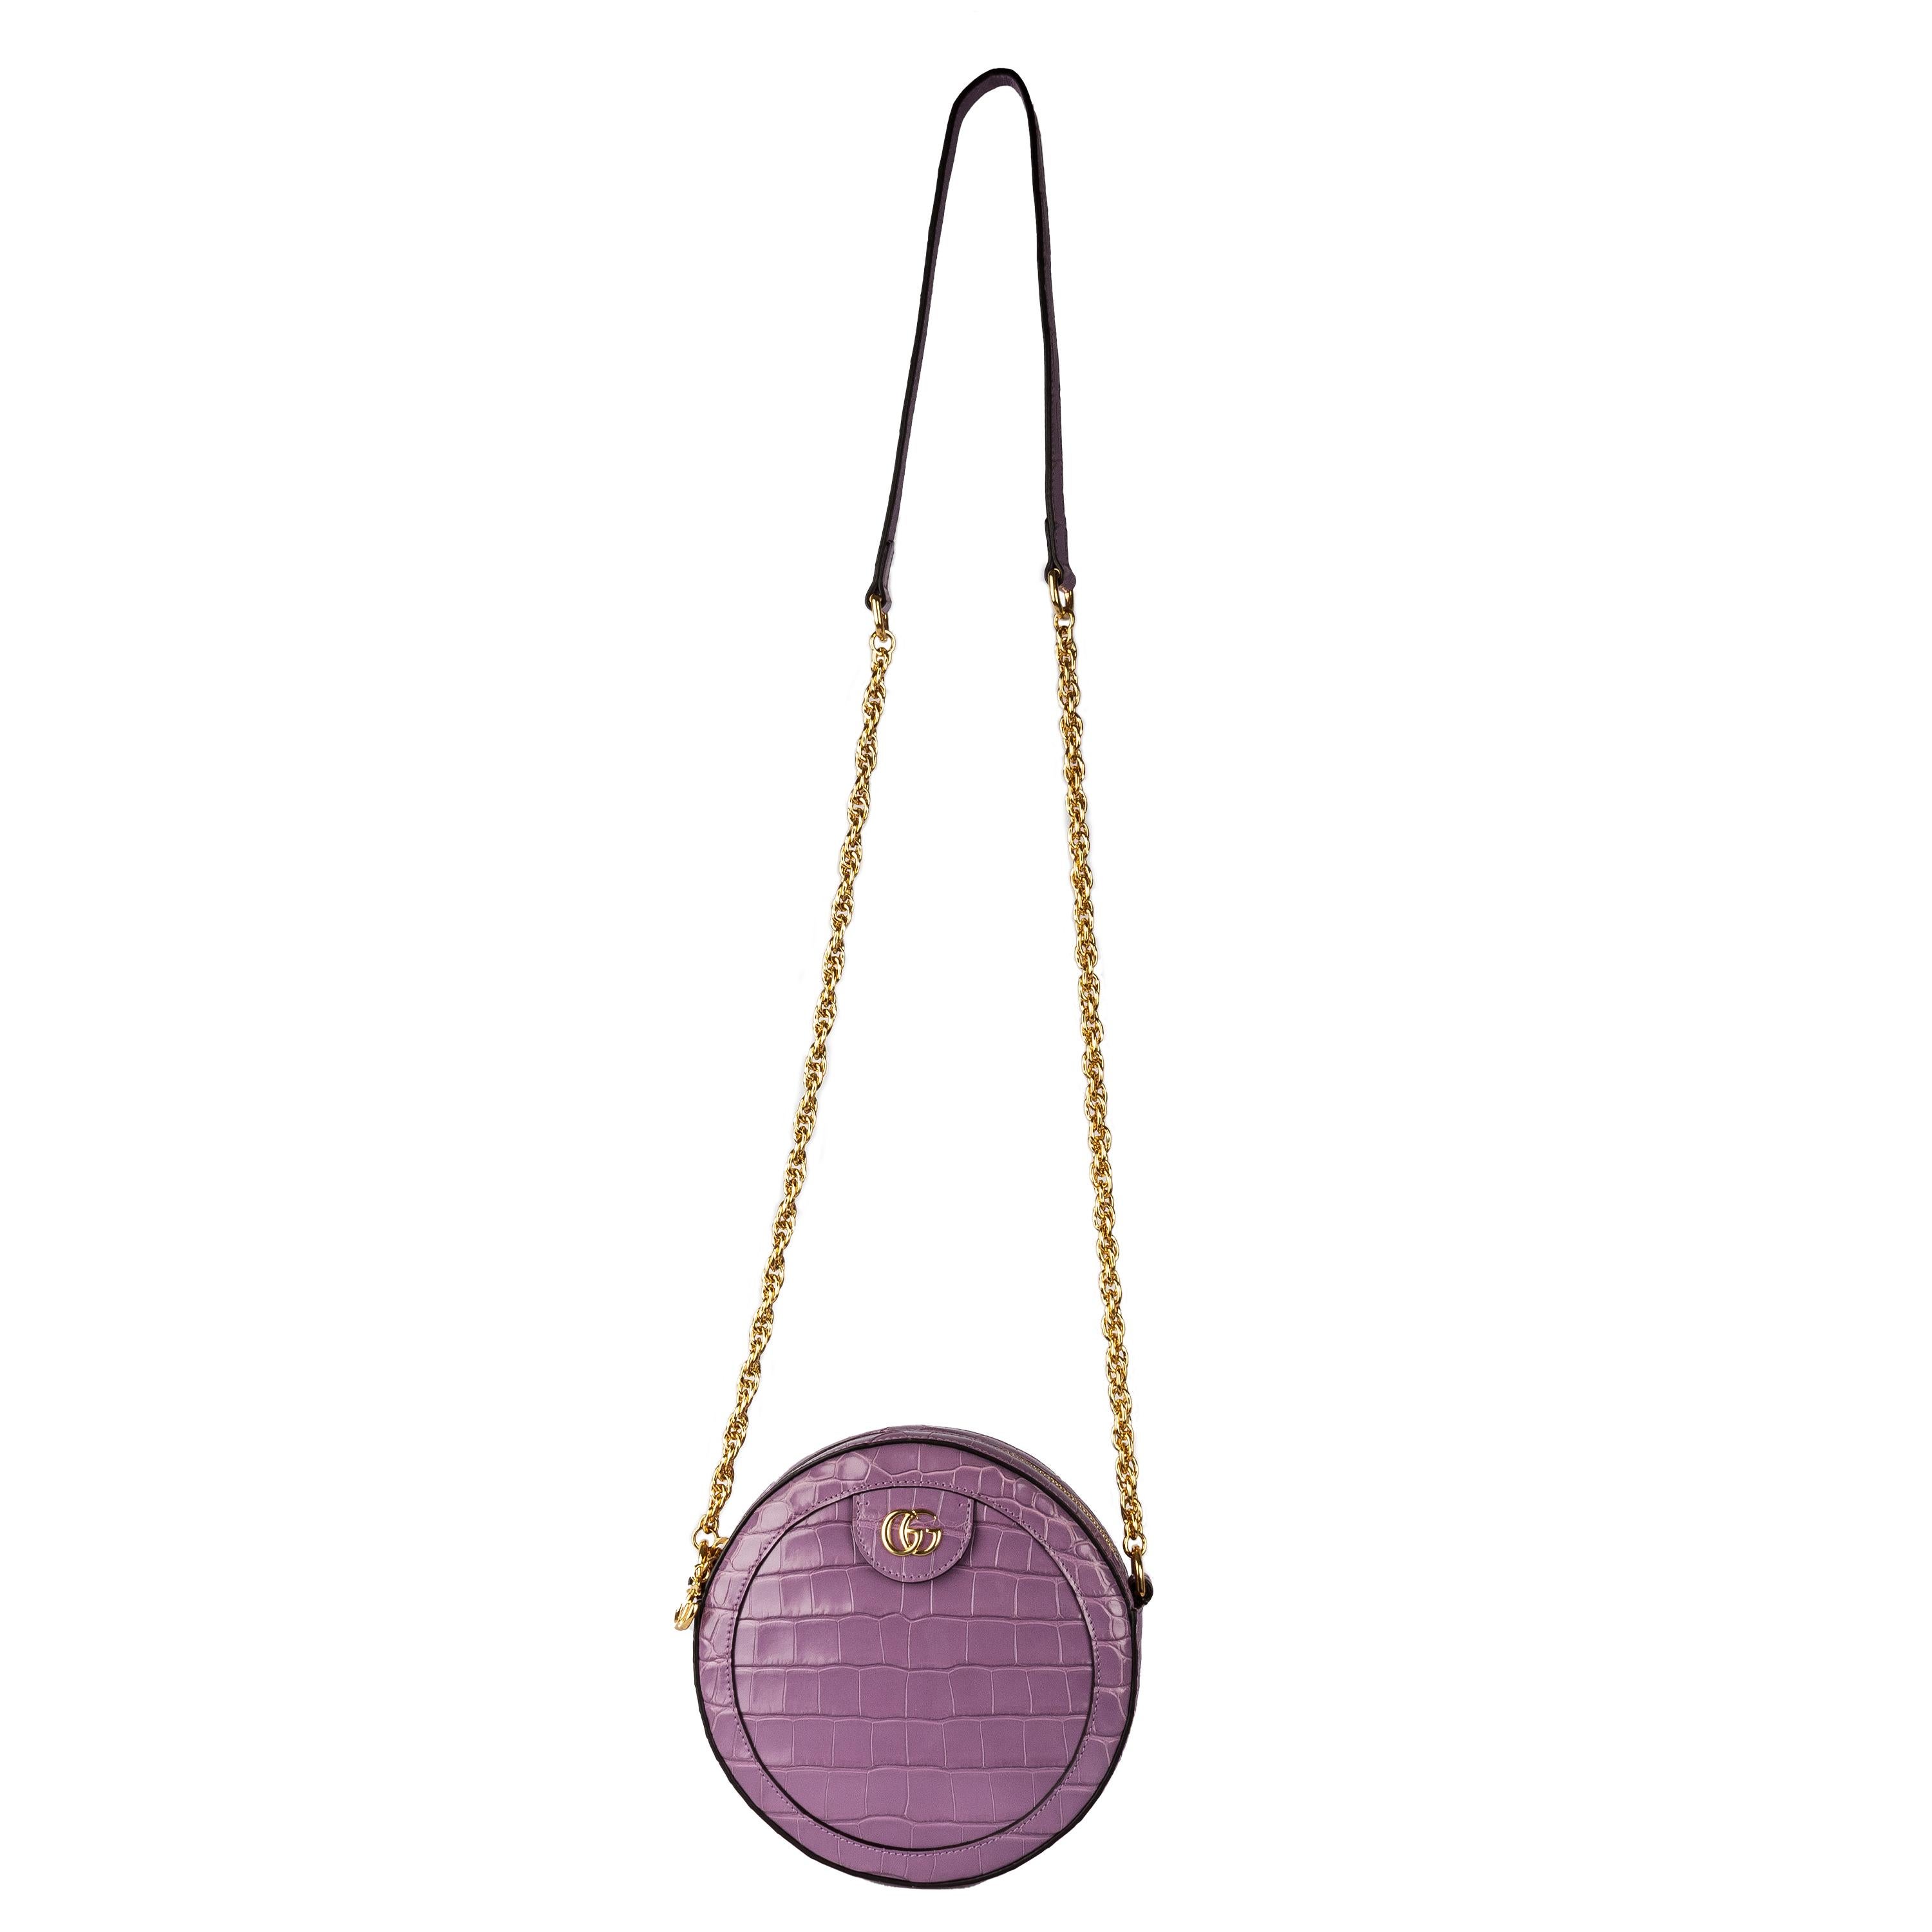 The Ophidia range welcomes a round mini bag in opulent crocodile leather, presented in an elegant lilac color. Crafted from luxurious crocodile leather, this Gucci Ophidia crossbody bag will elevate any outfit. It features a comfortable chain